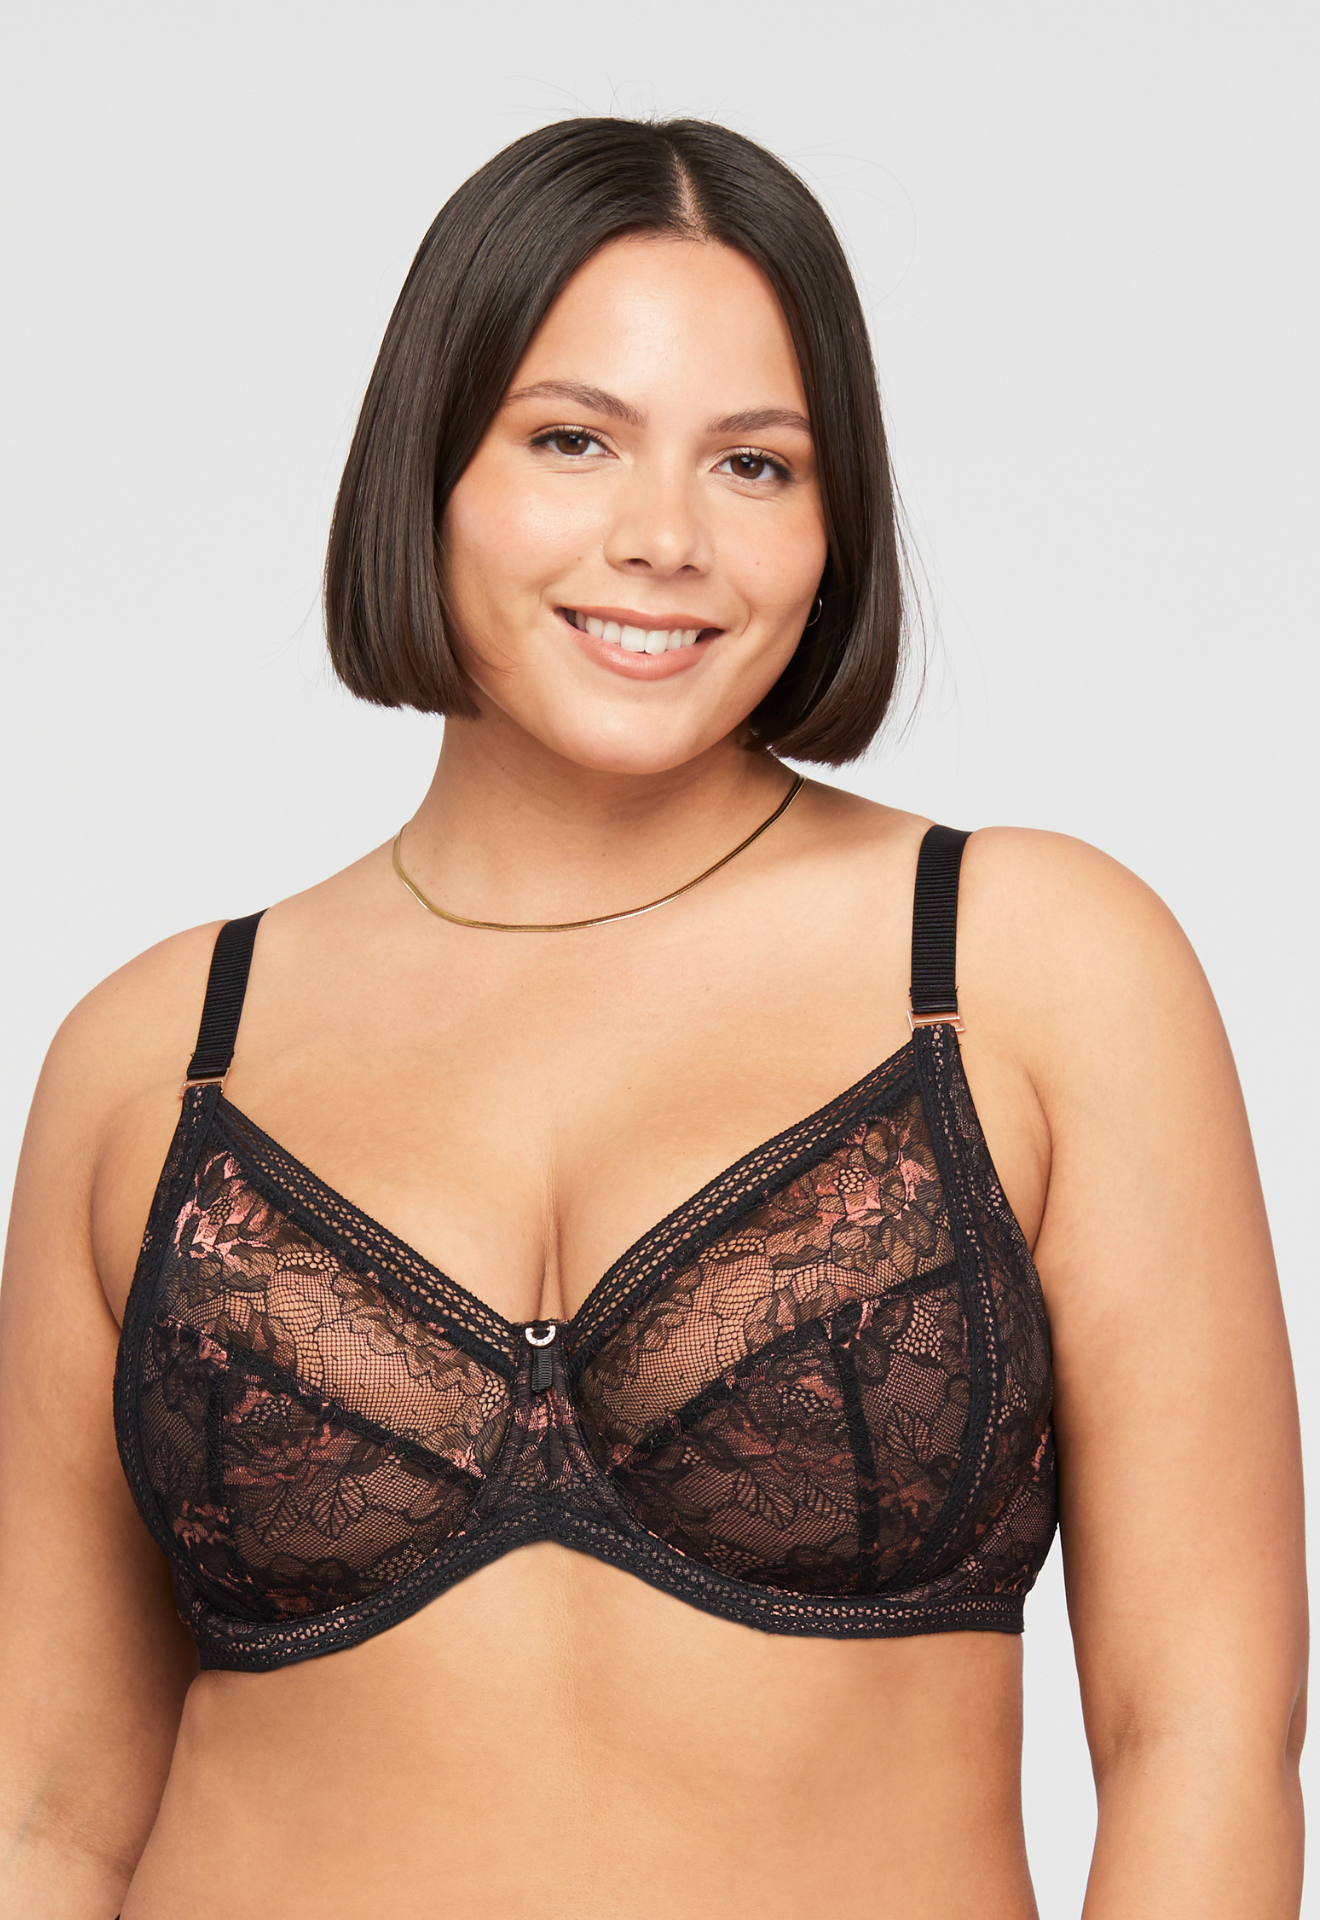 Enchanted Muse Bra - Black/Pecan, worn by model, front view